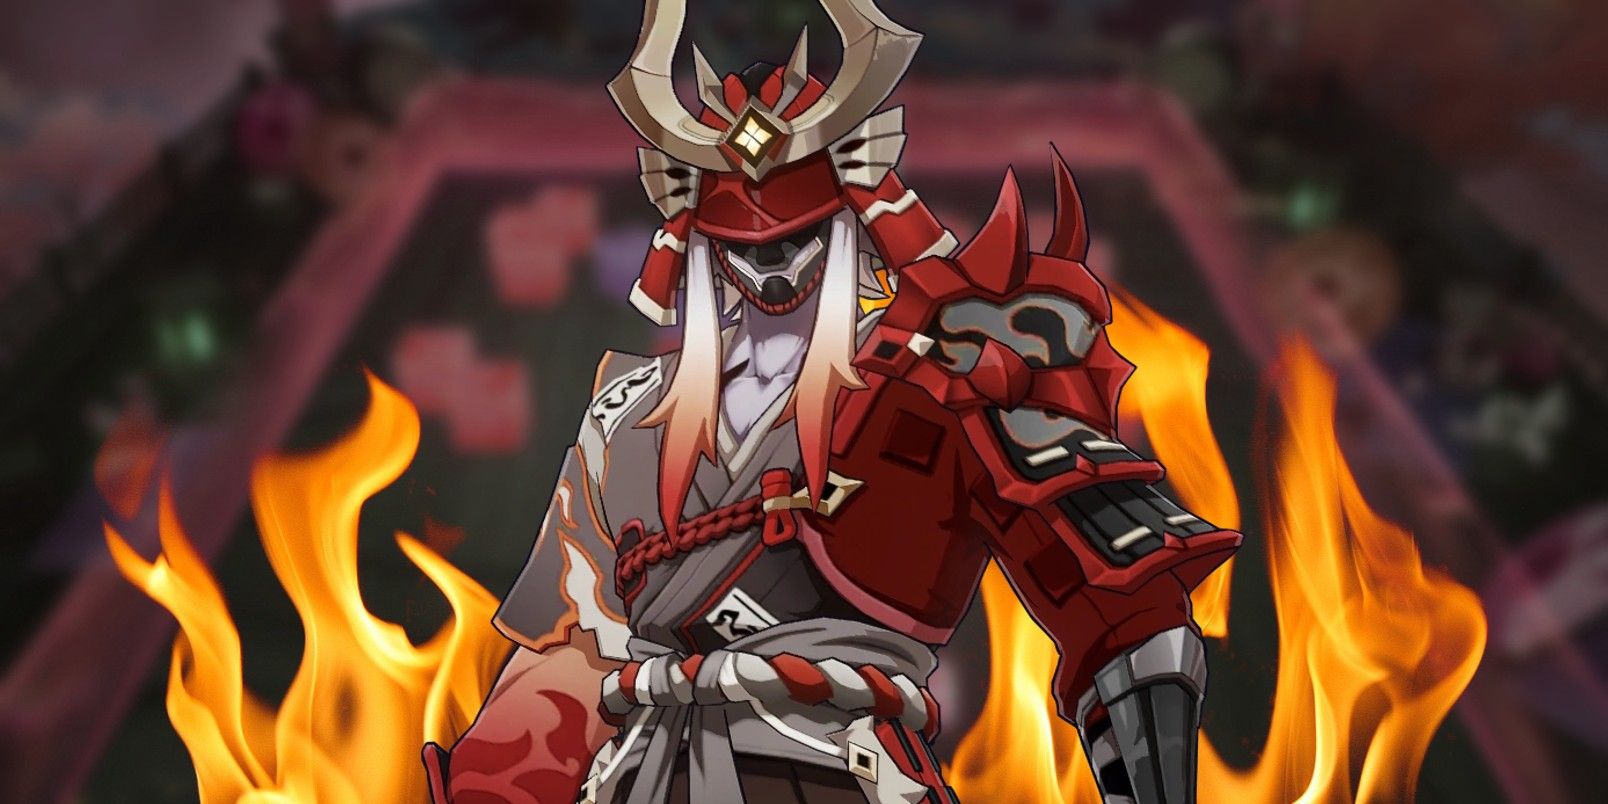 Genshin Impact's Kairagi: Fiery Might stands in front of the Akitsu Yuugei field, with flames directly behind him, representing the Deranged Decrepit Duelist Shatterdark challenge.